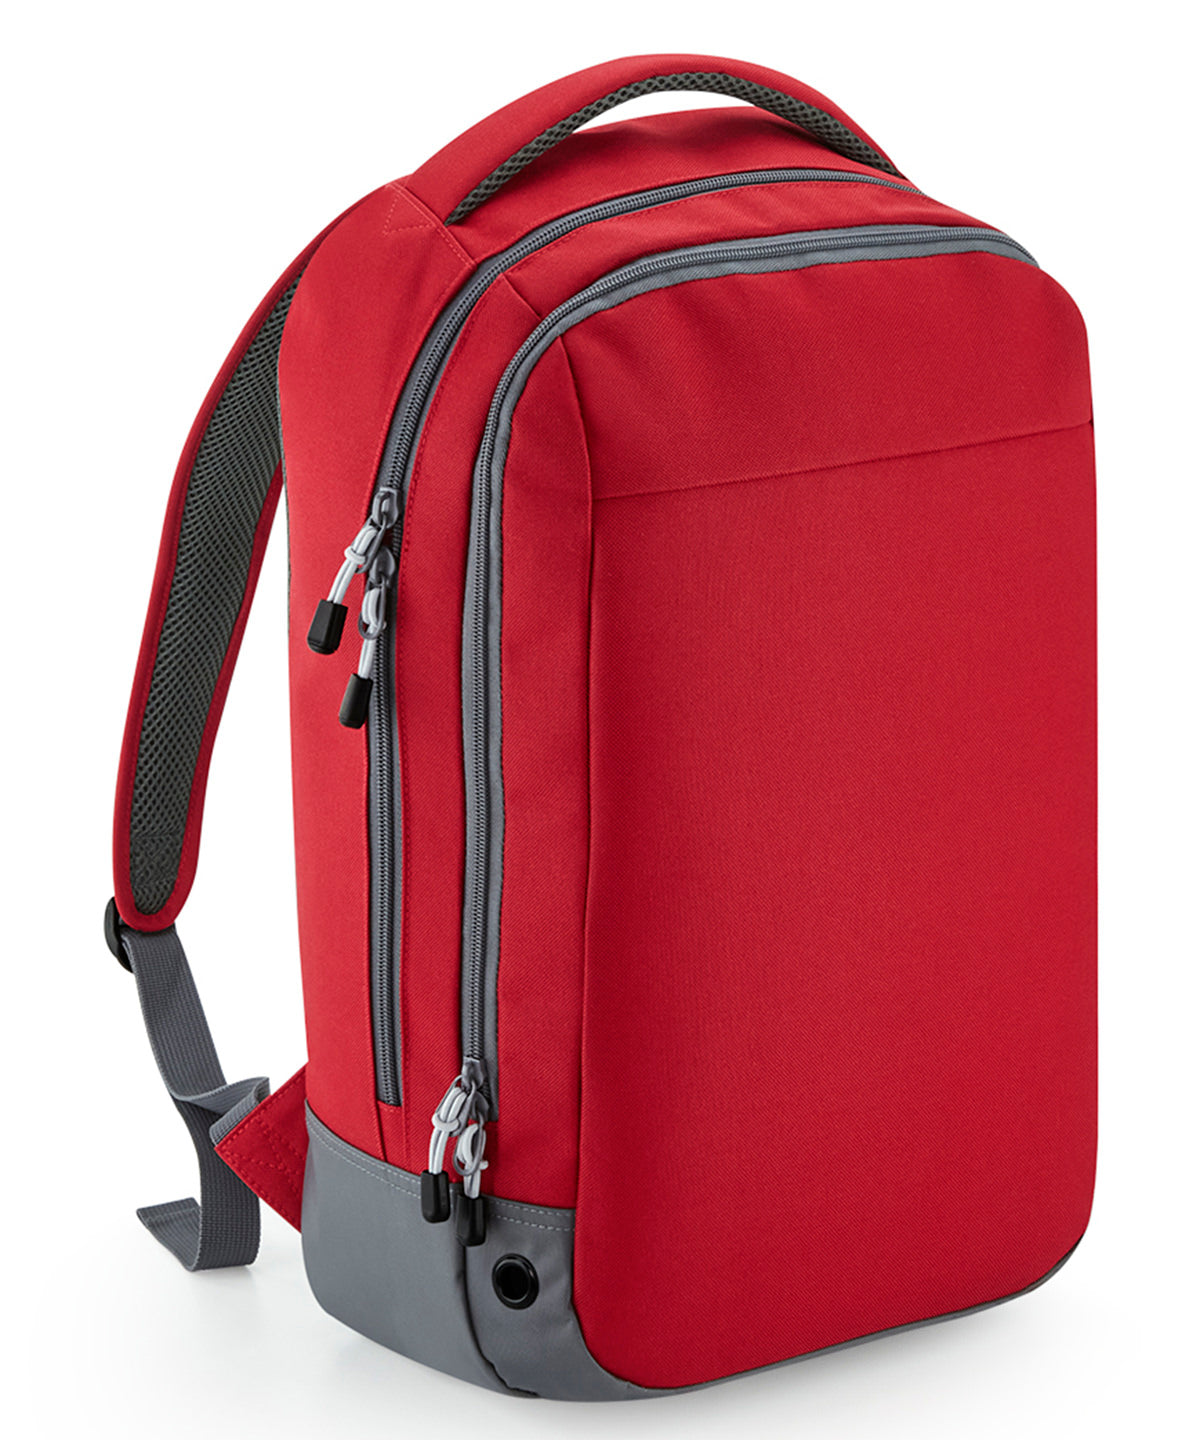 Athleisure sports backpack